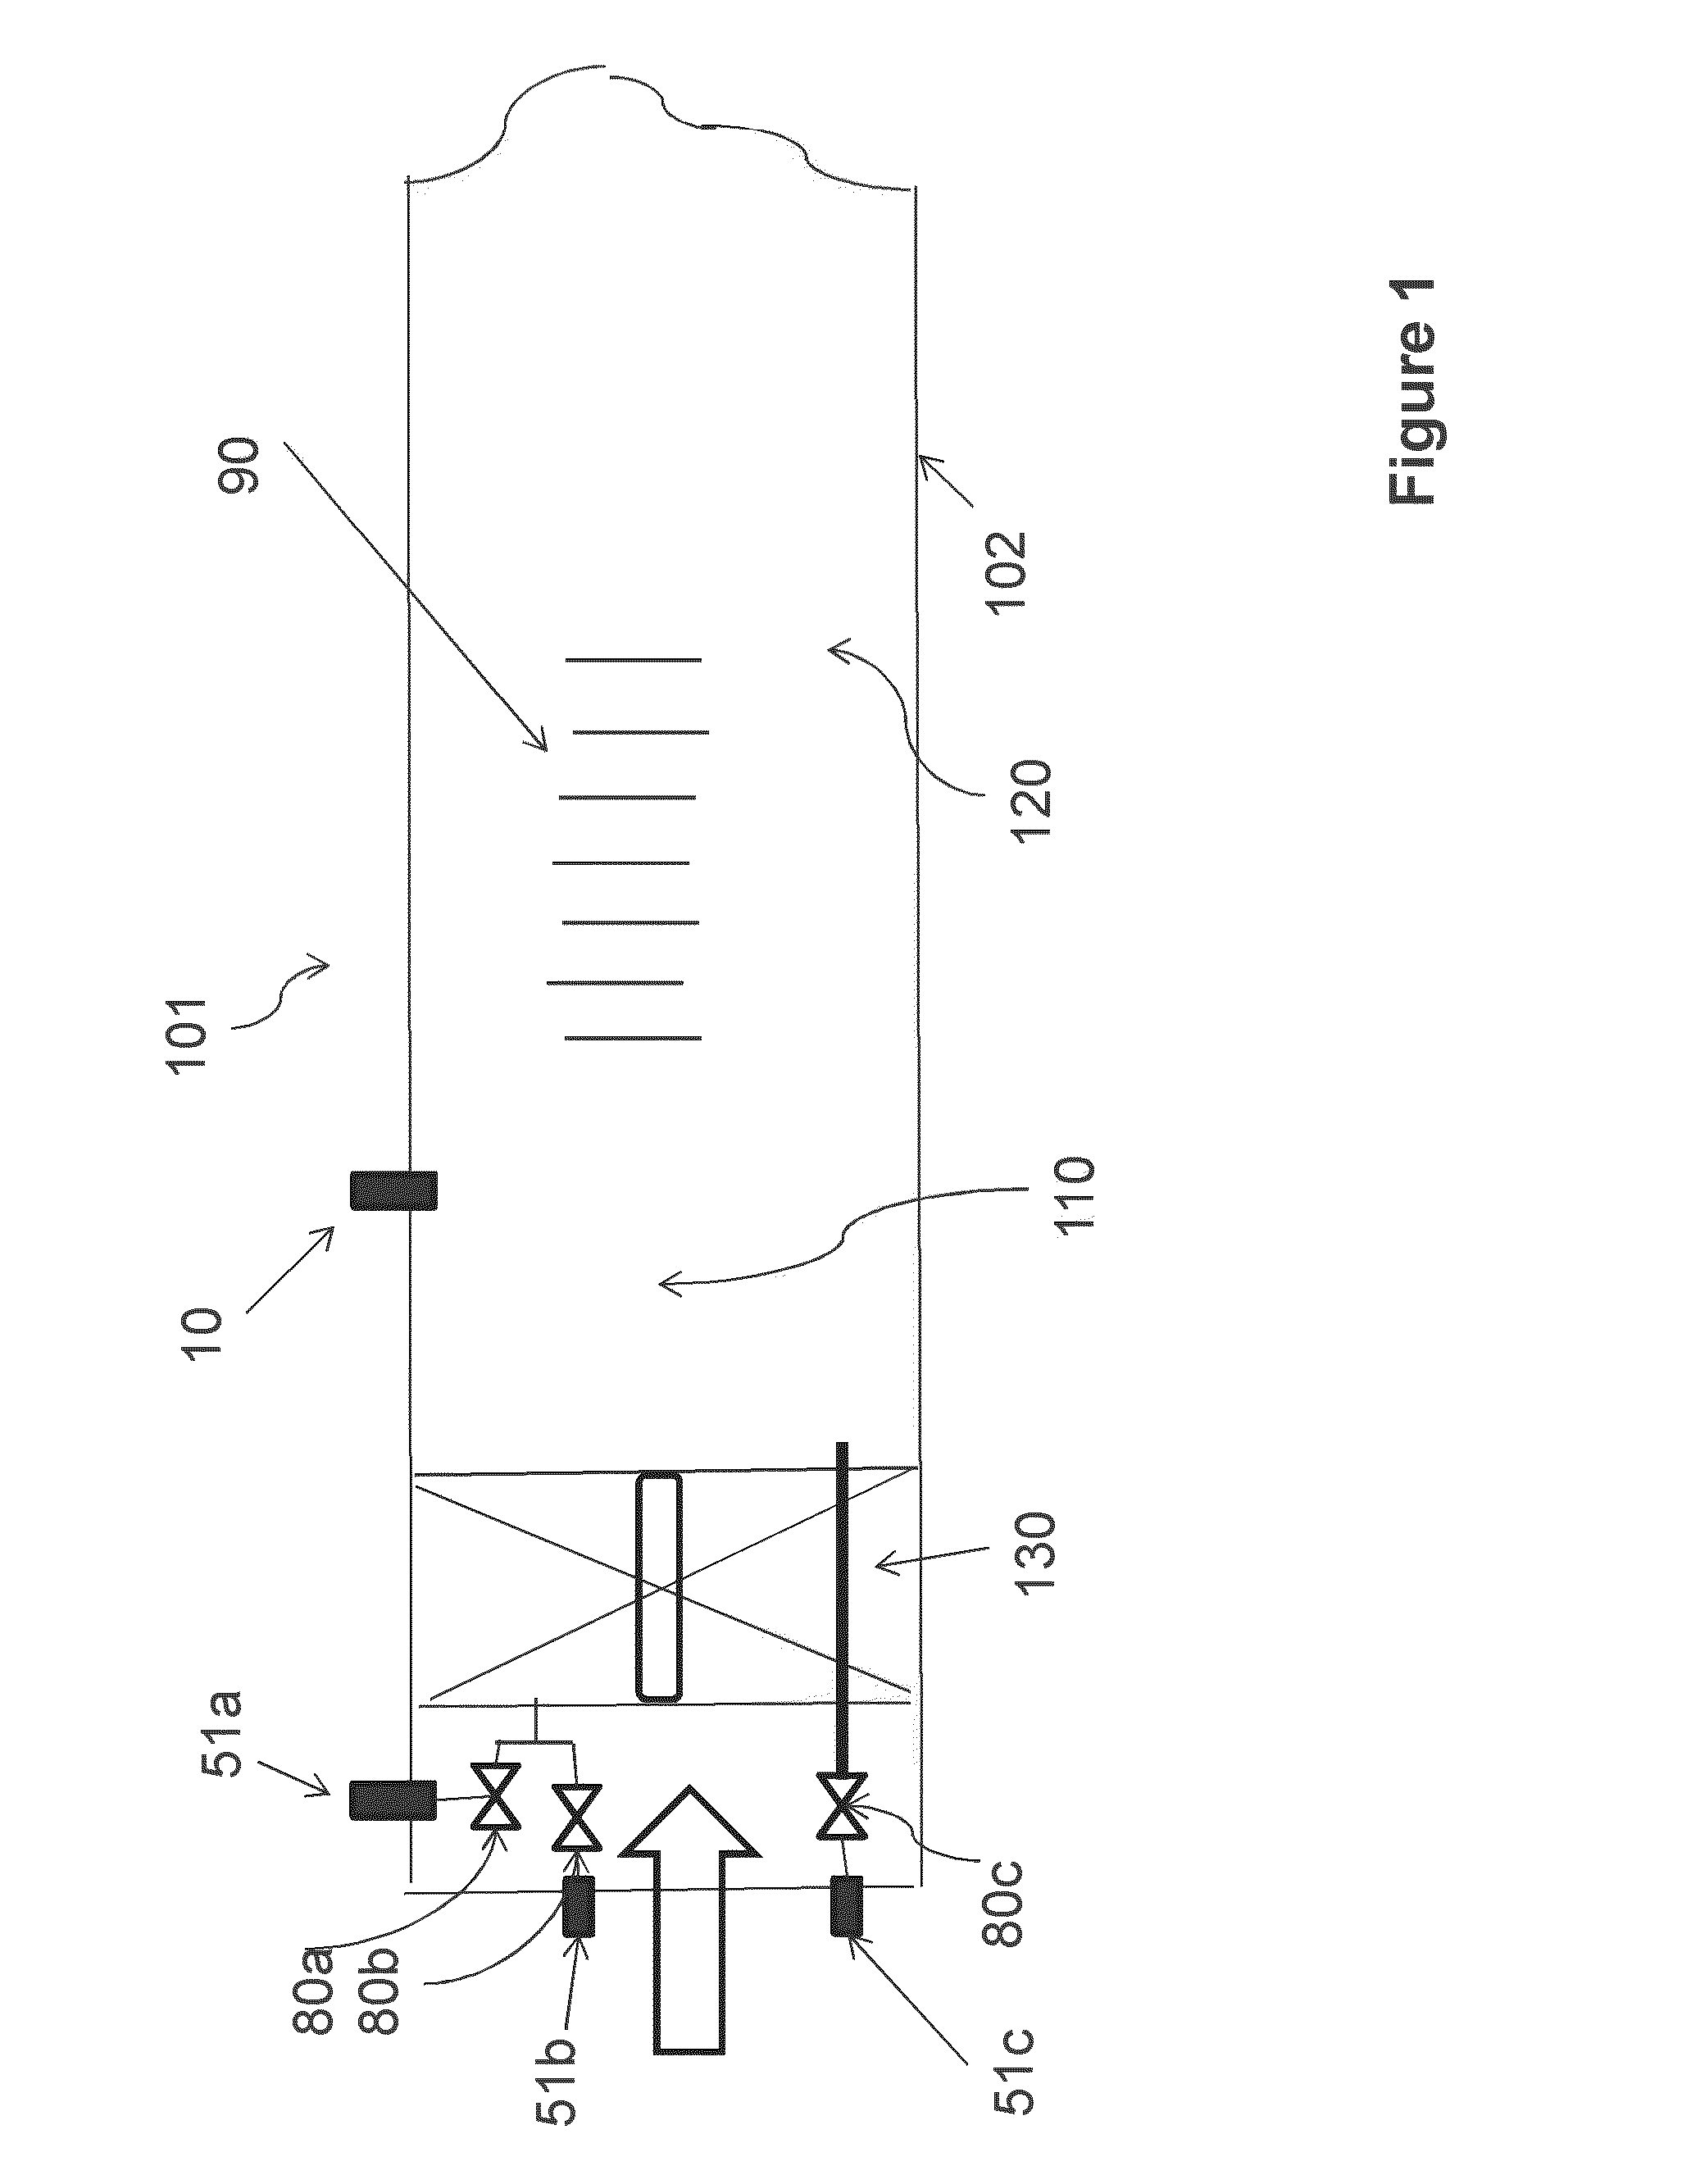 Pulse detonation tool, method and system for formation fracturing